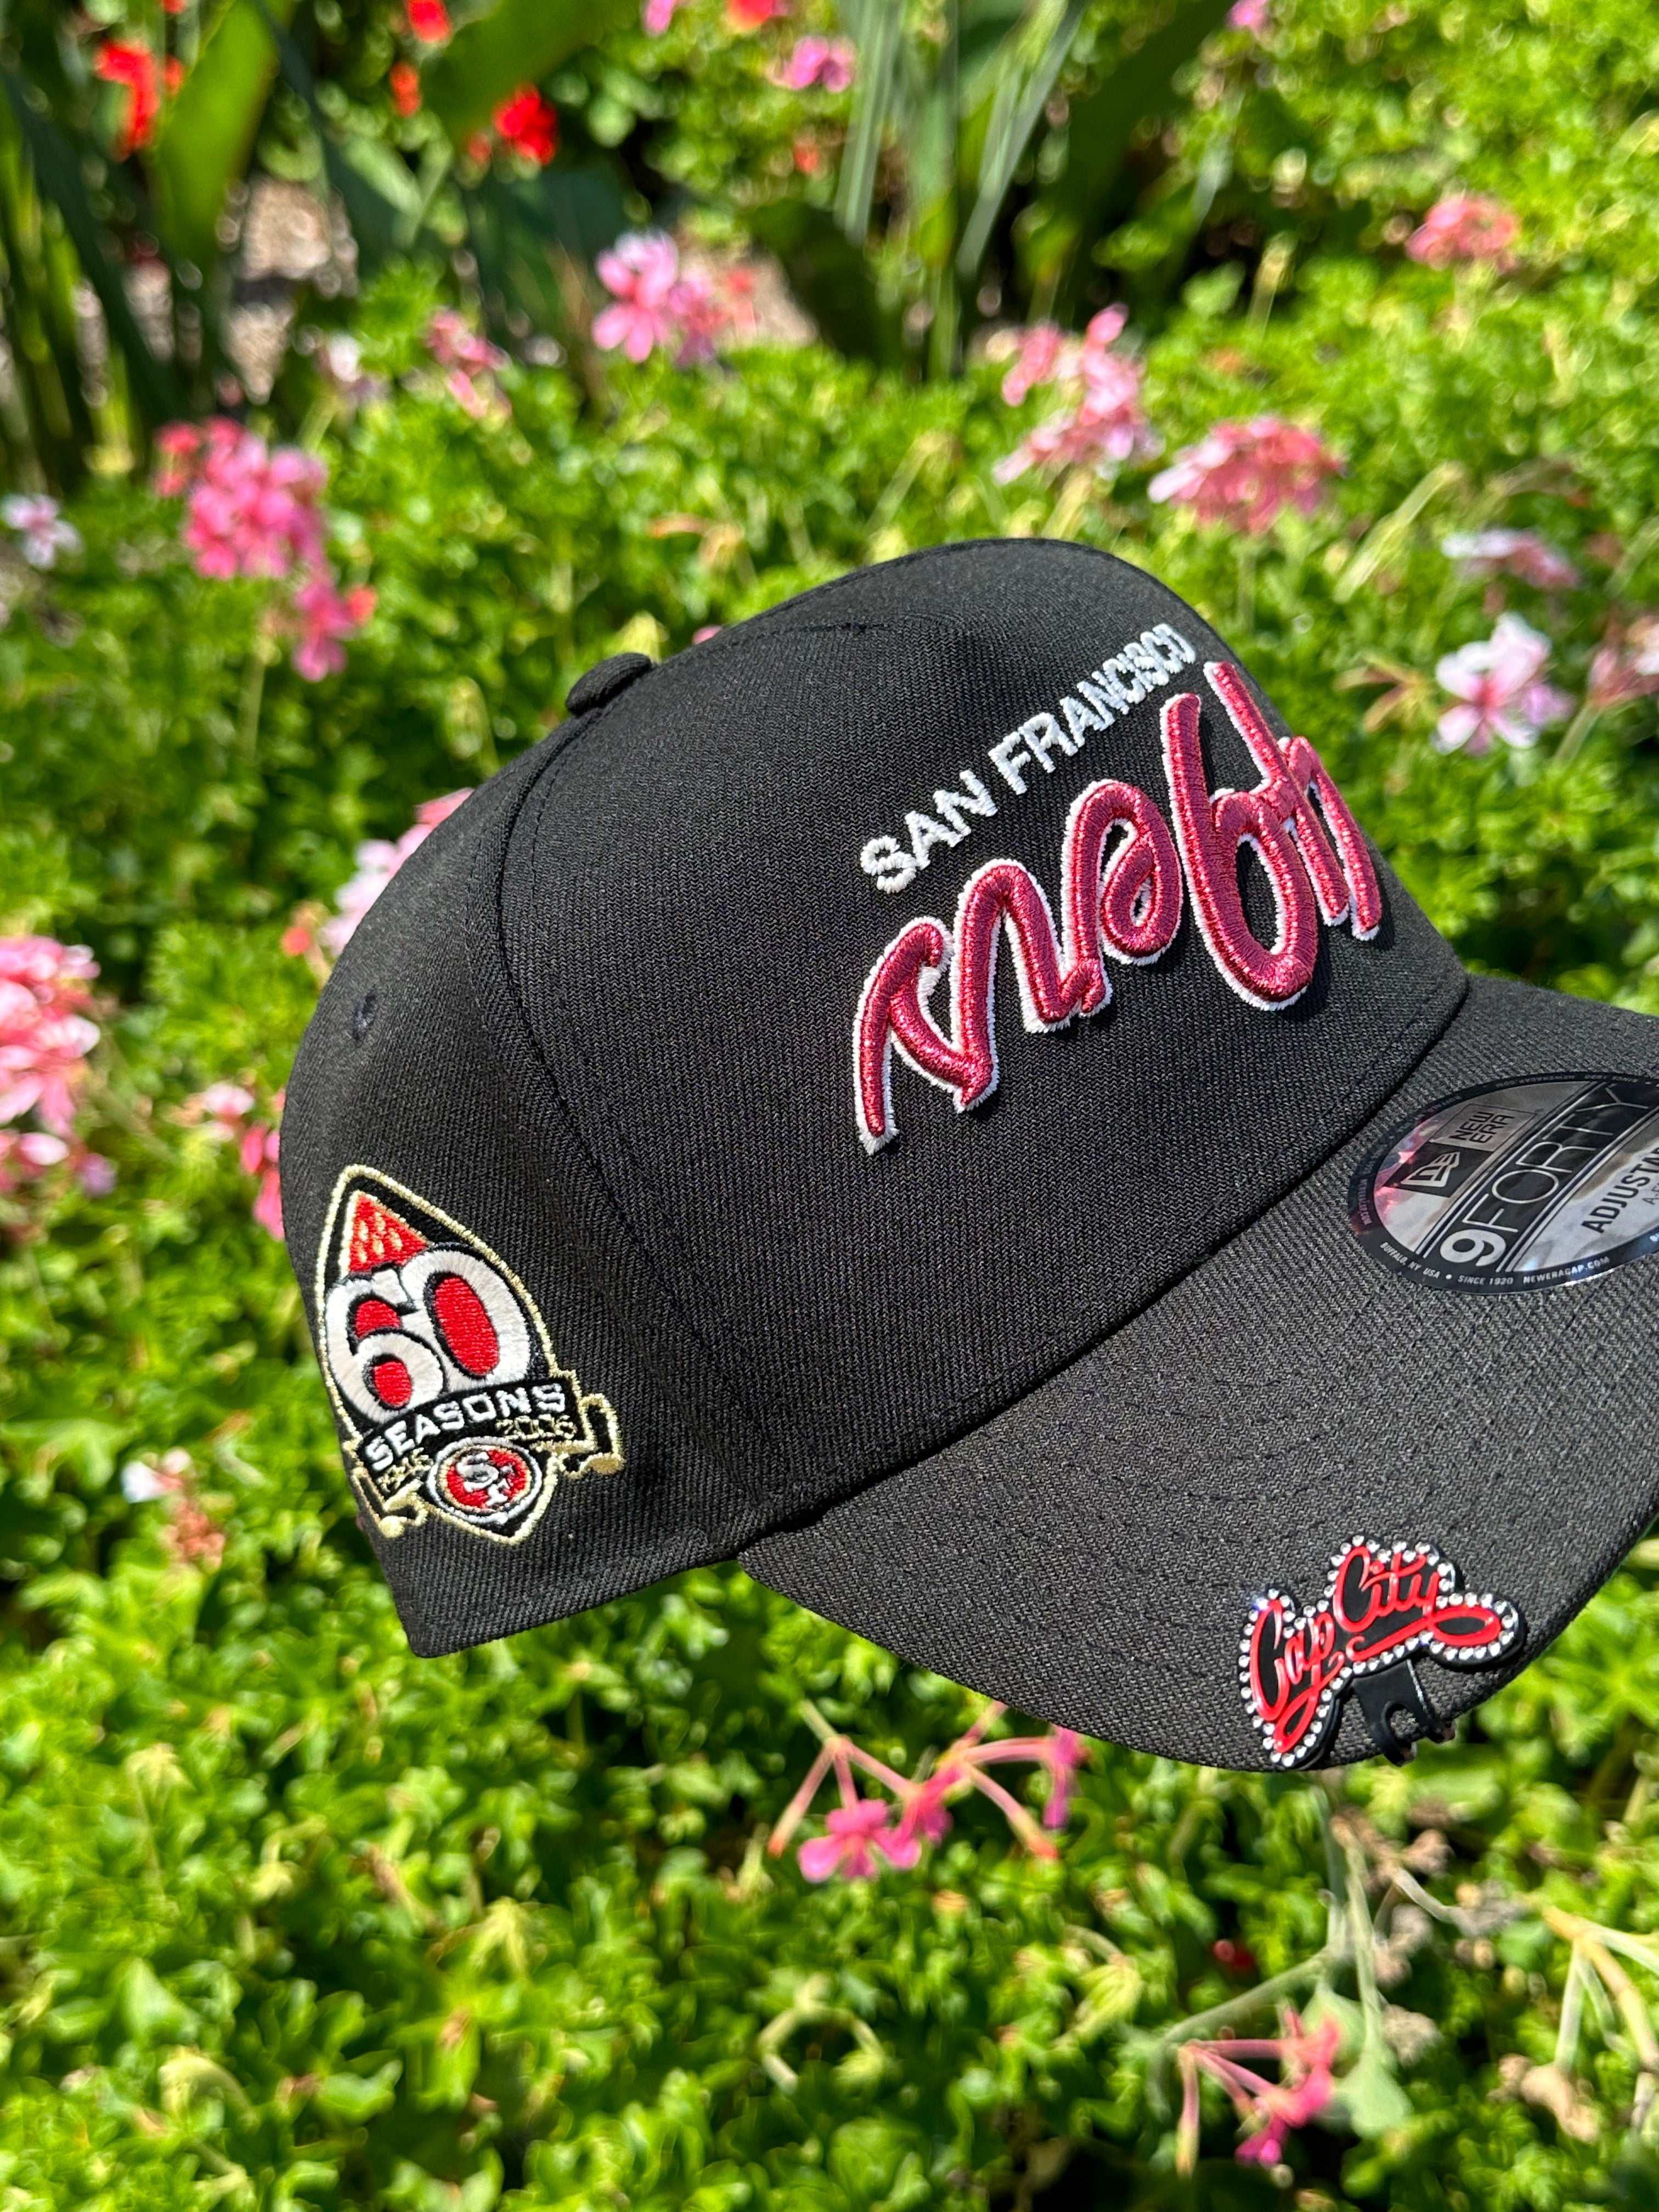 NEW ERA EXCLUSIVE 9FORTY A-FRAME BLACK UPSIDE DOWN SAN FRANSICO 49ERS ADJUSTABLE W/ 60TH ANNIVERSARY SIDE PATCH